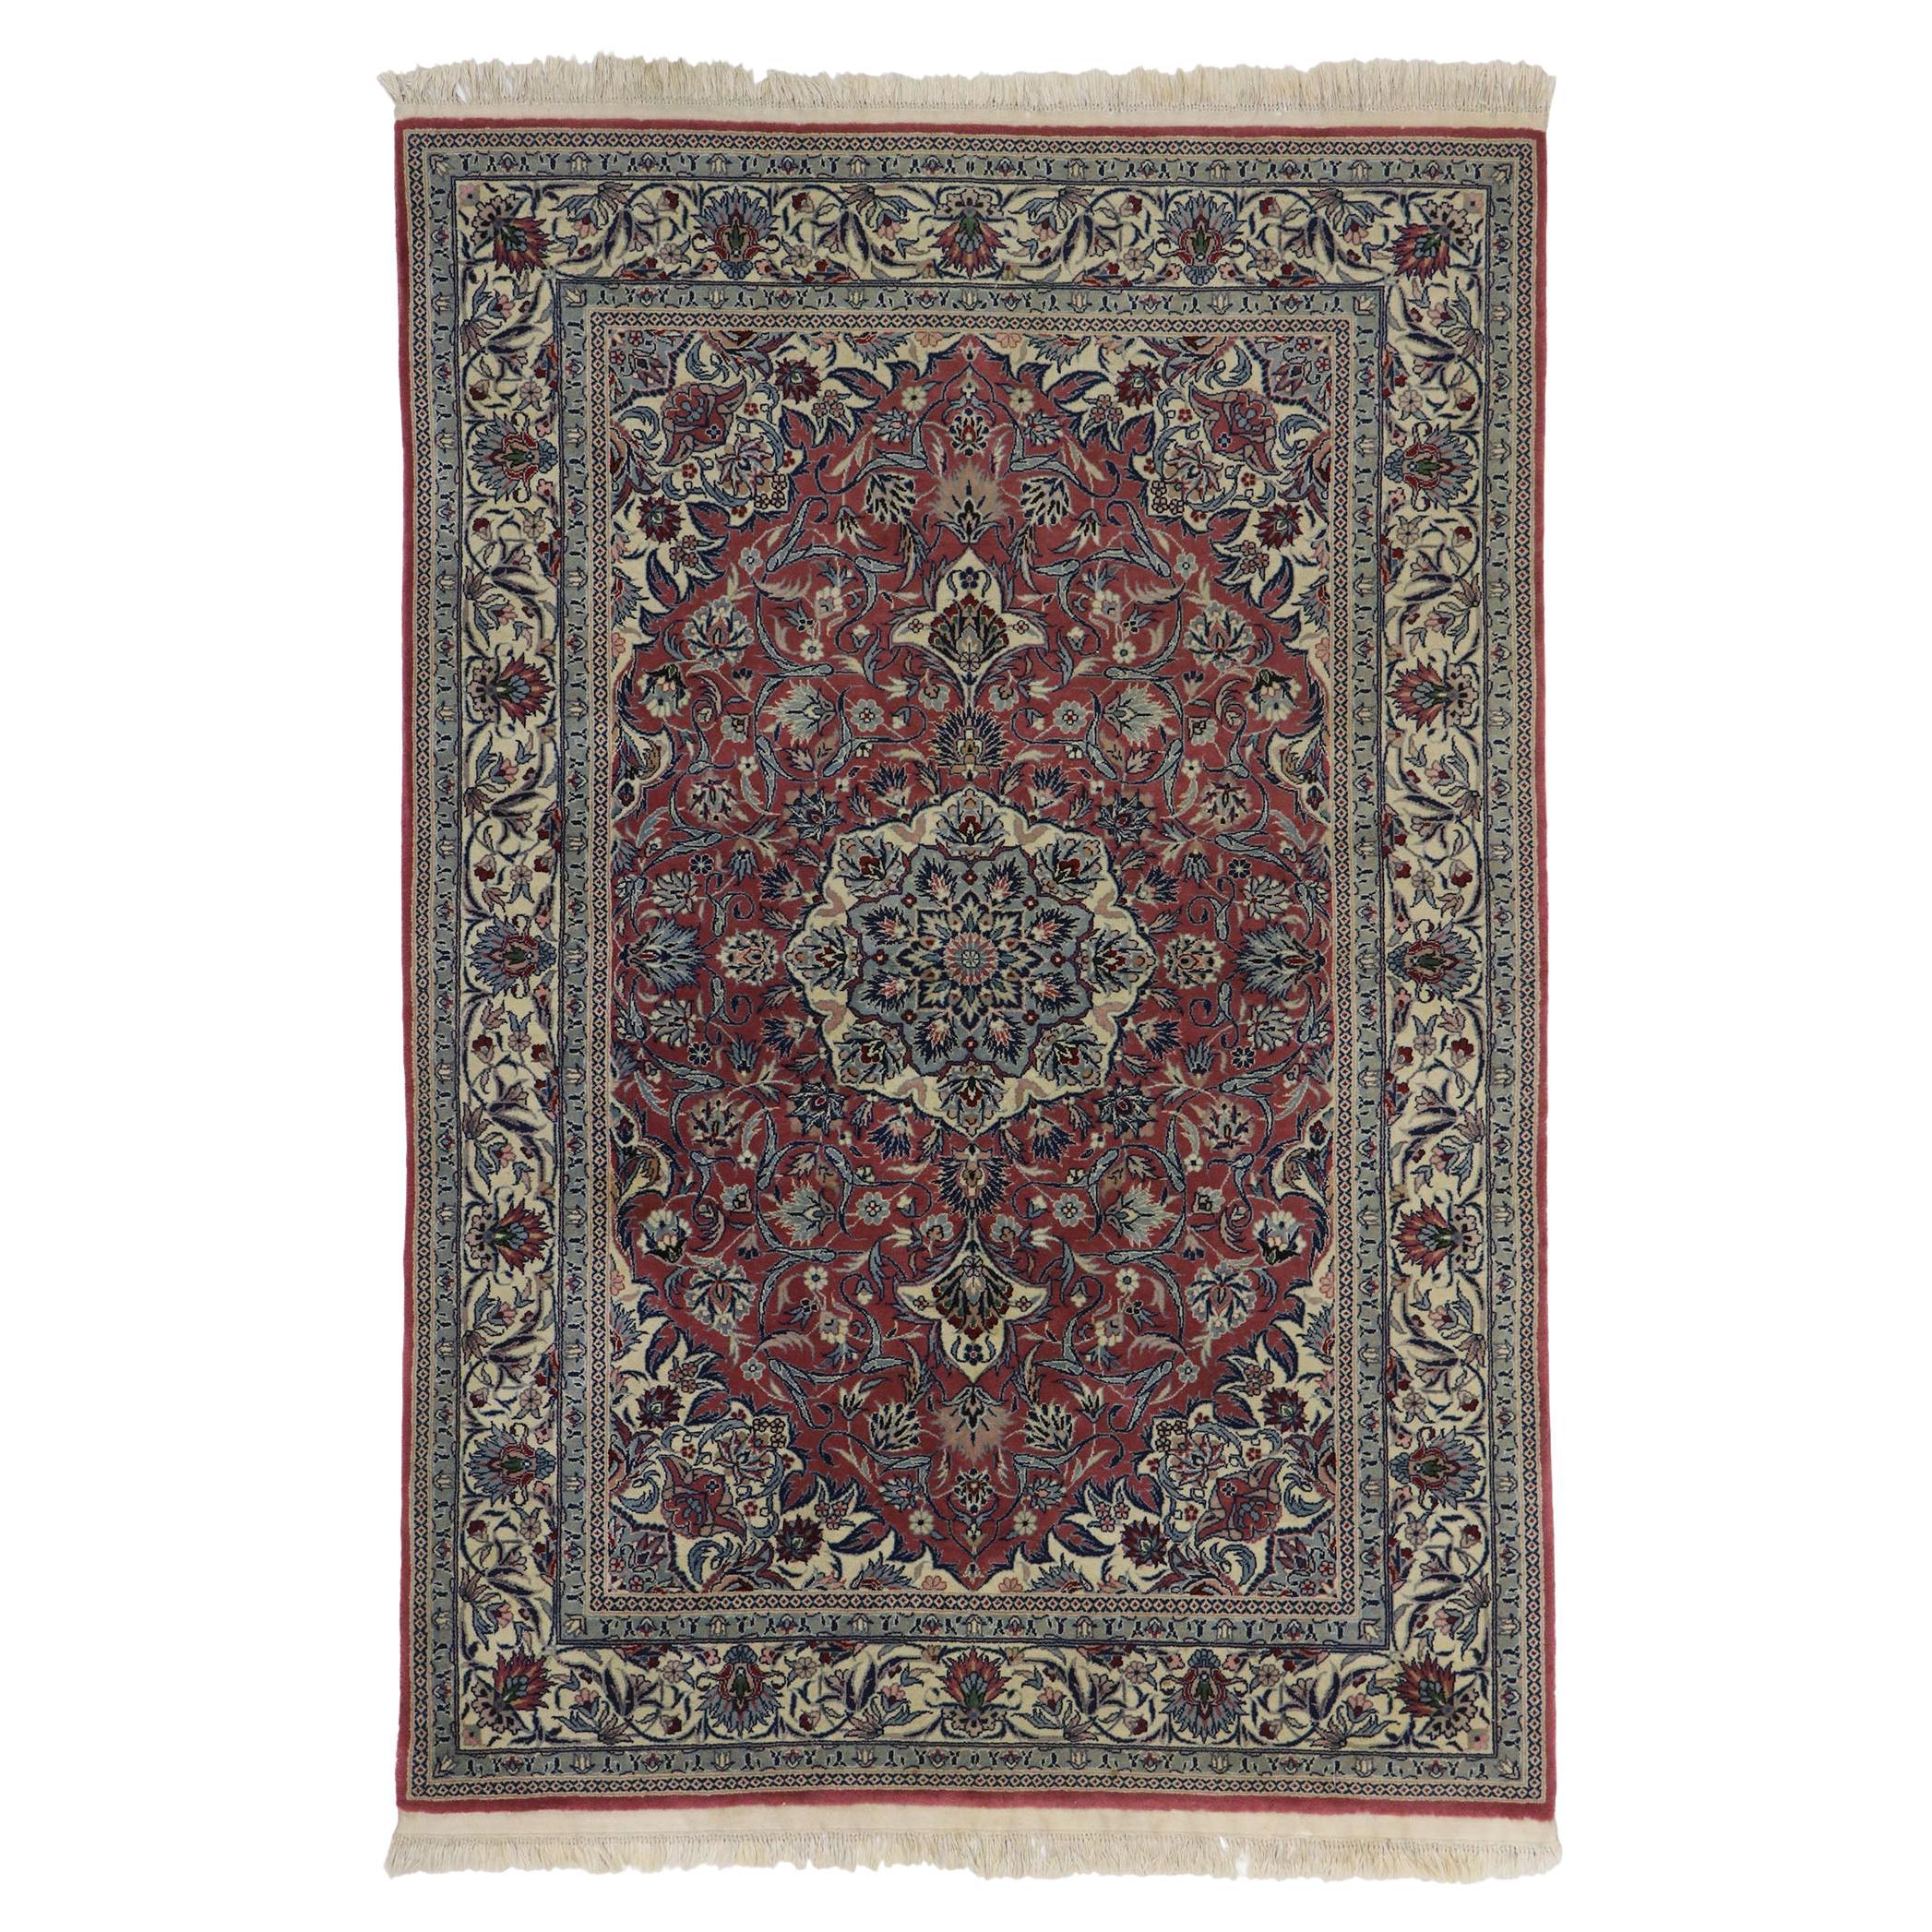 Vintage Chinese Tabriz Rug with Traditional Style